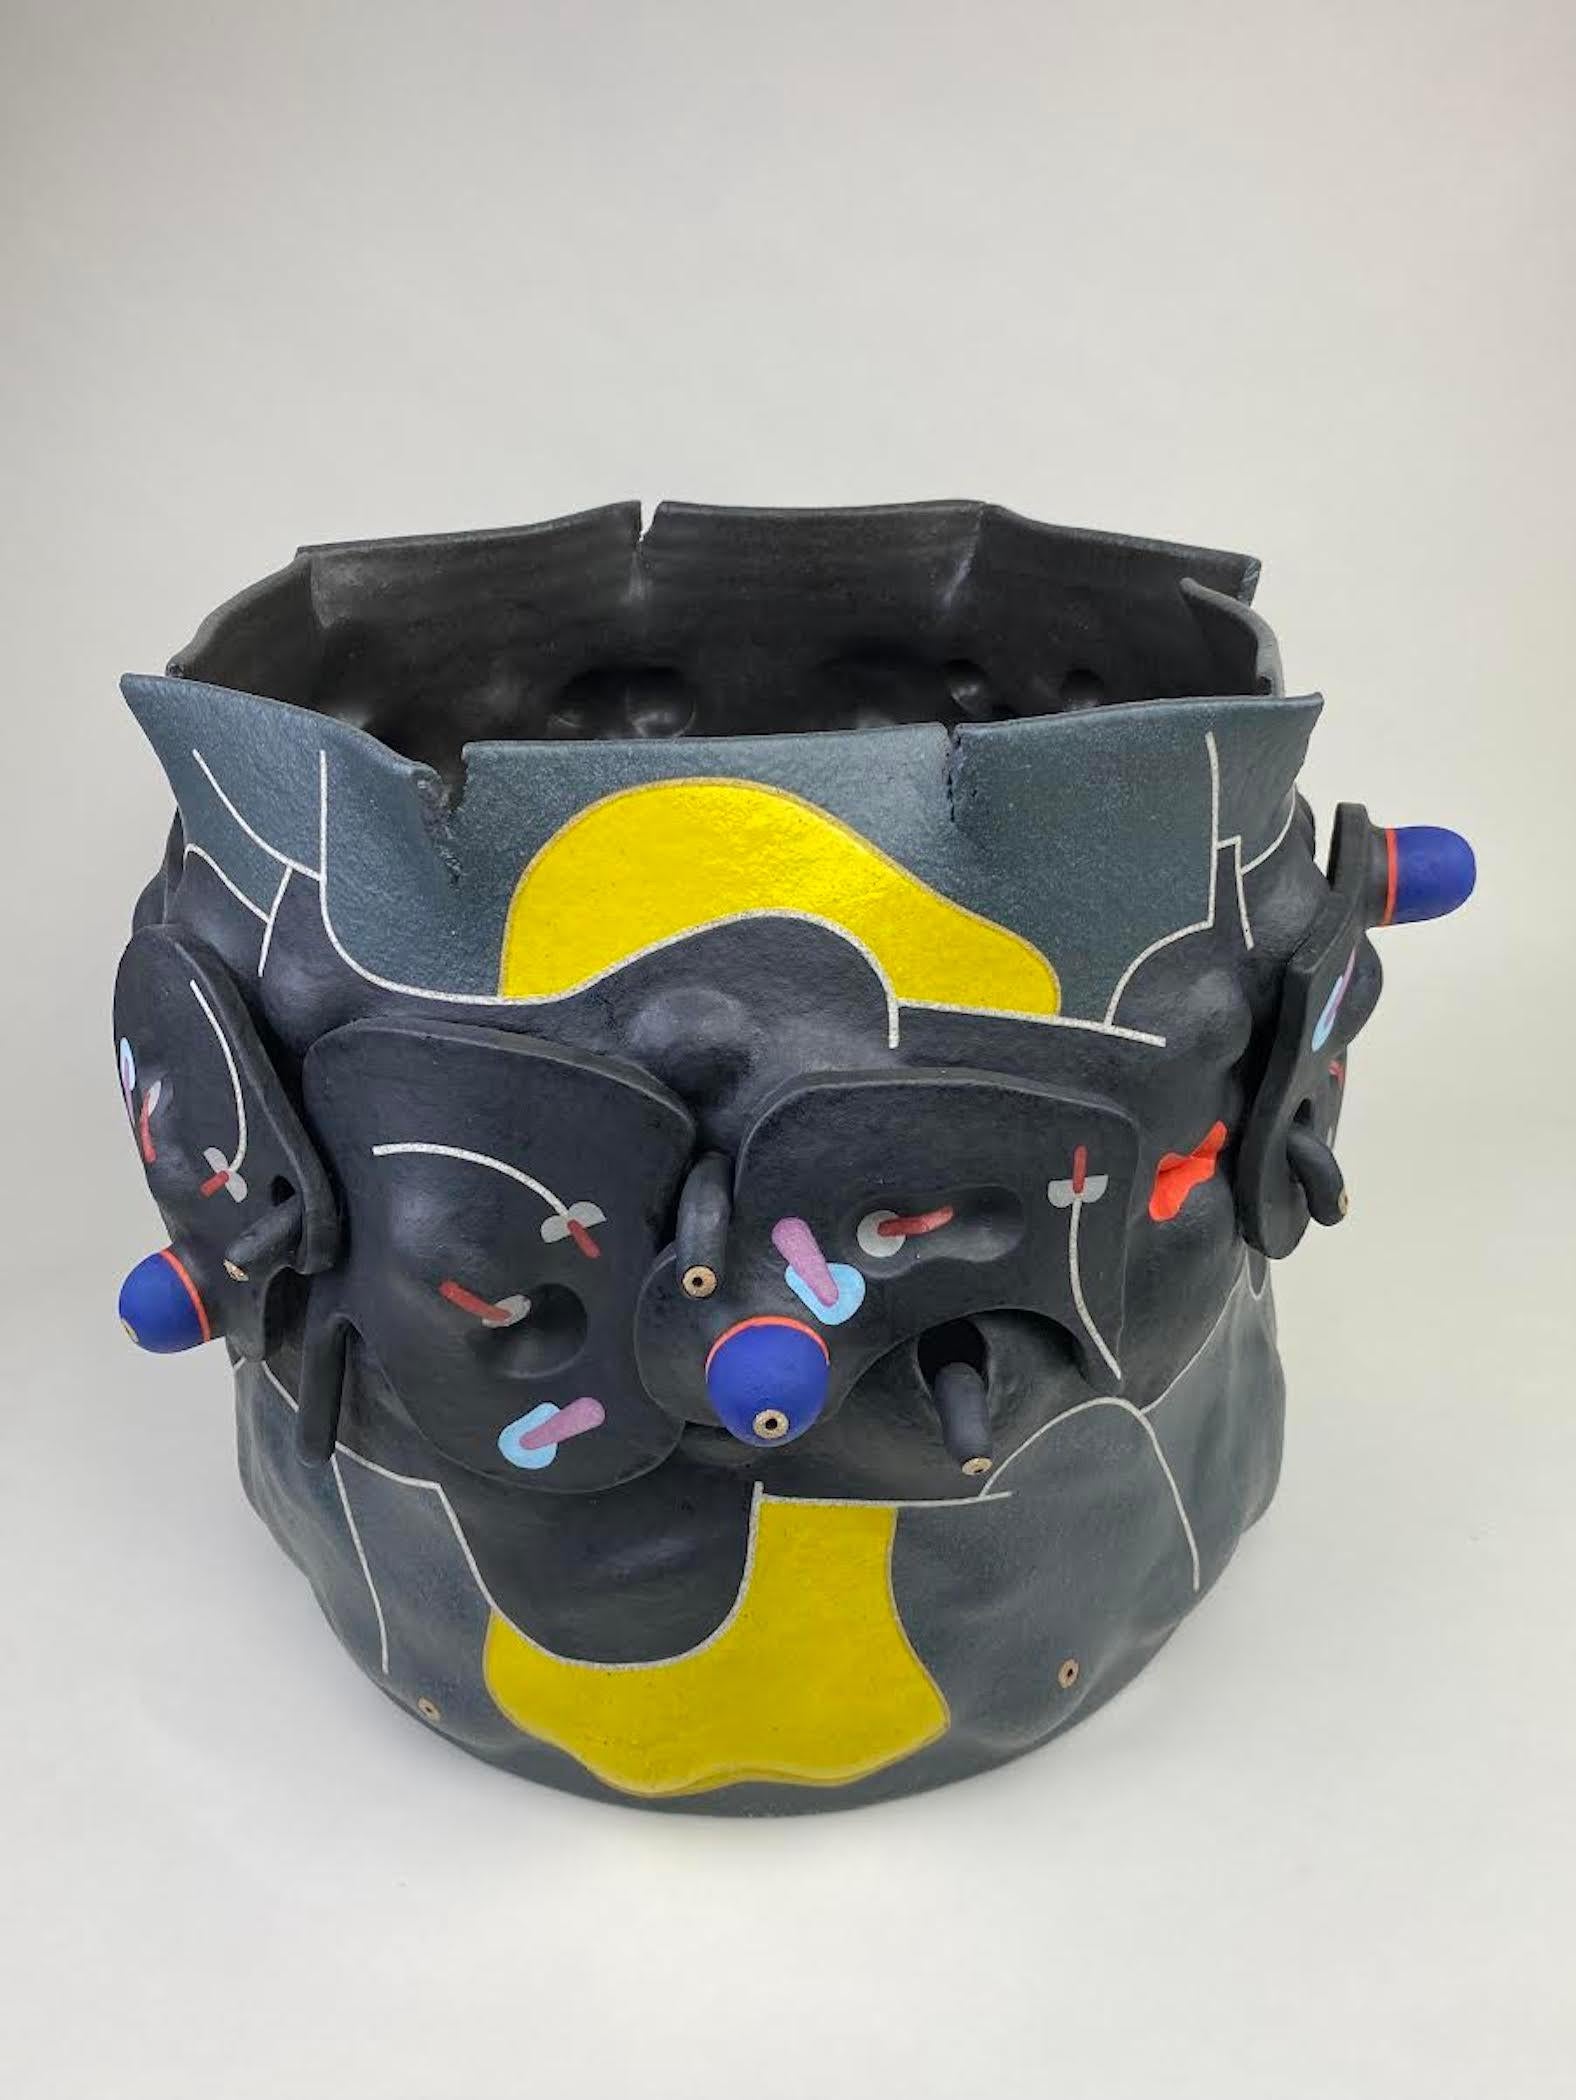 José Sierra  is a self-taught artist and ceramicist, born in Mérida, Venezuela in 1975. His work draws inspiration from his  heritage, along with pre-Hispanic art, East Asian pottery, and contemporary design. His work teems with super-saturated